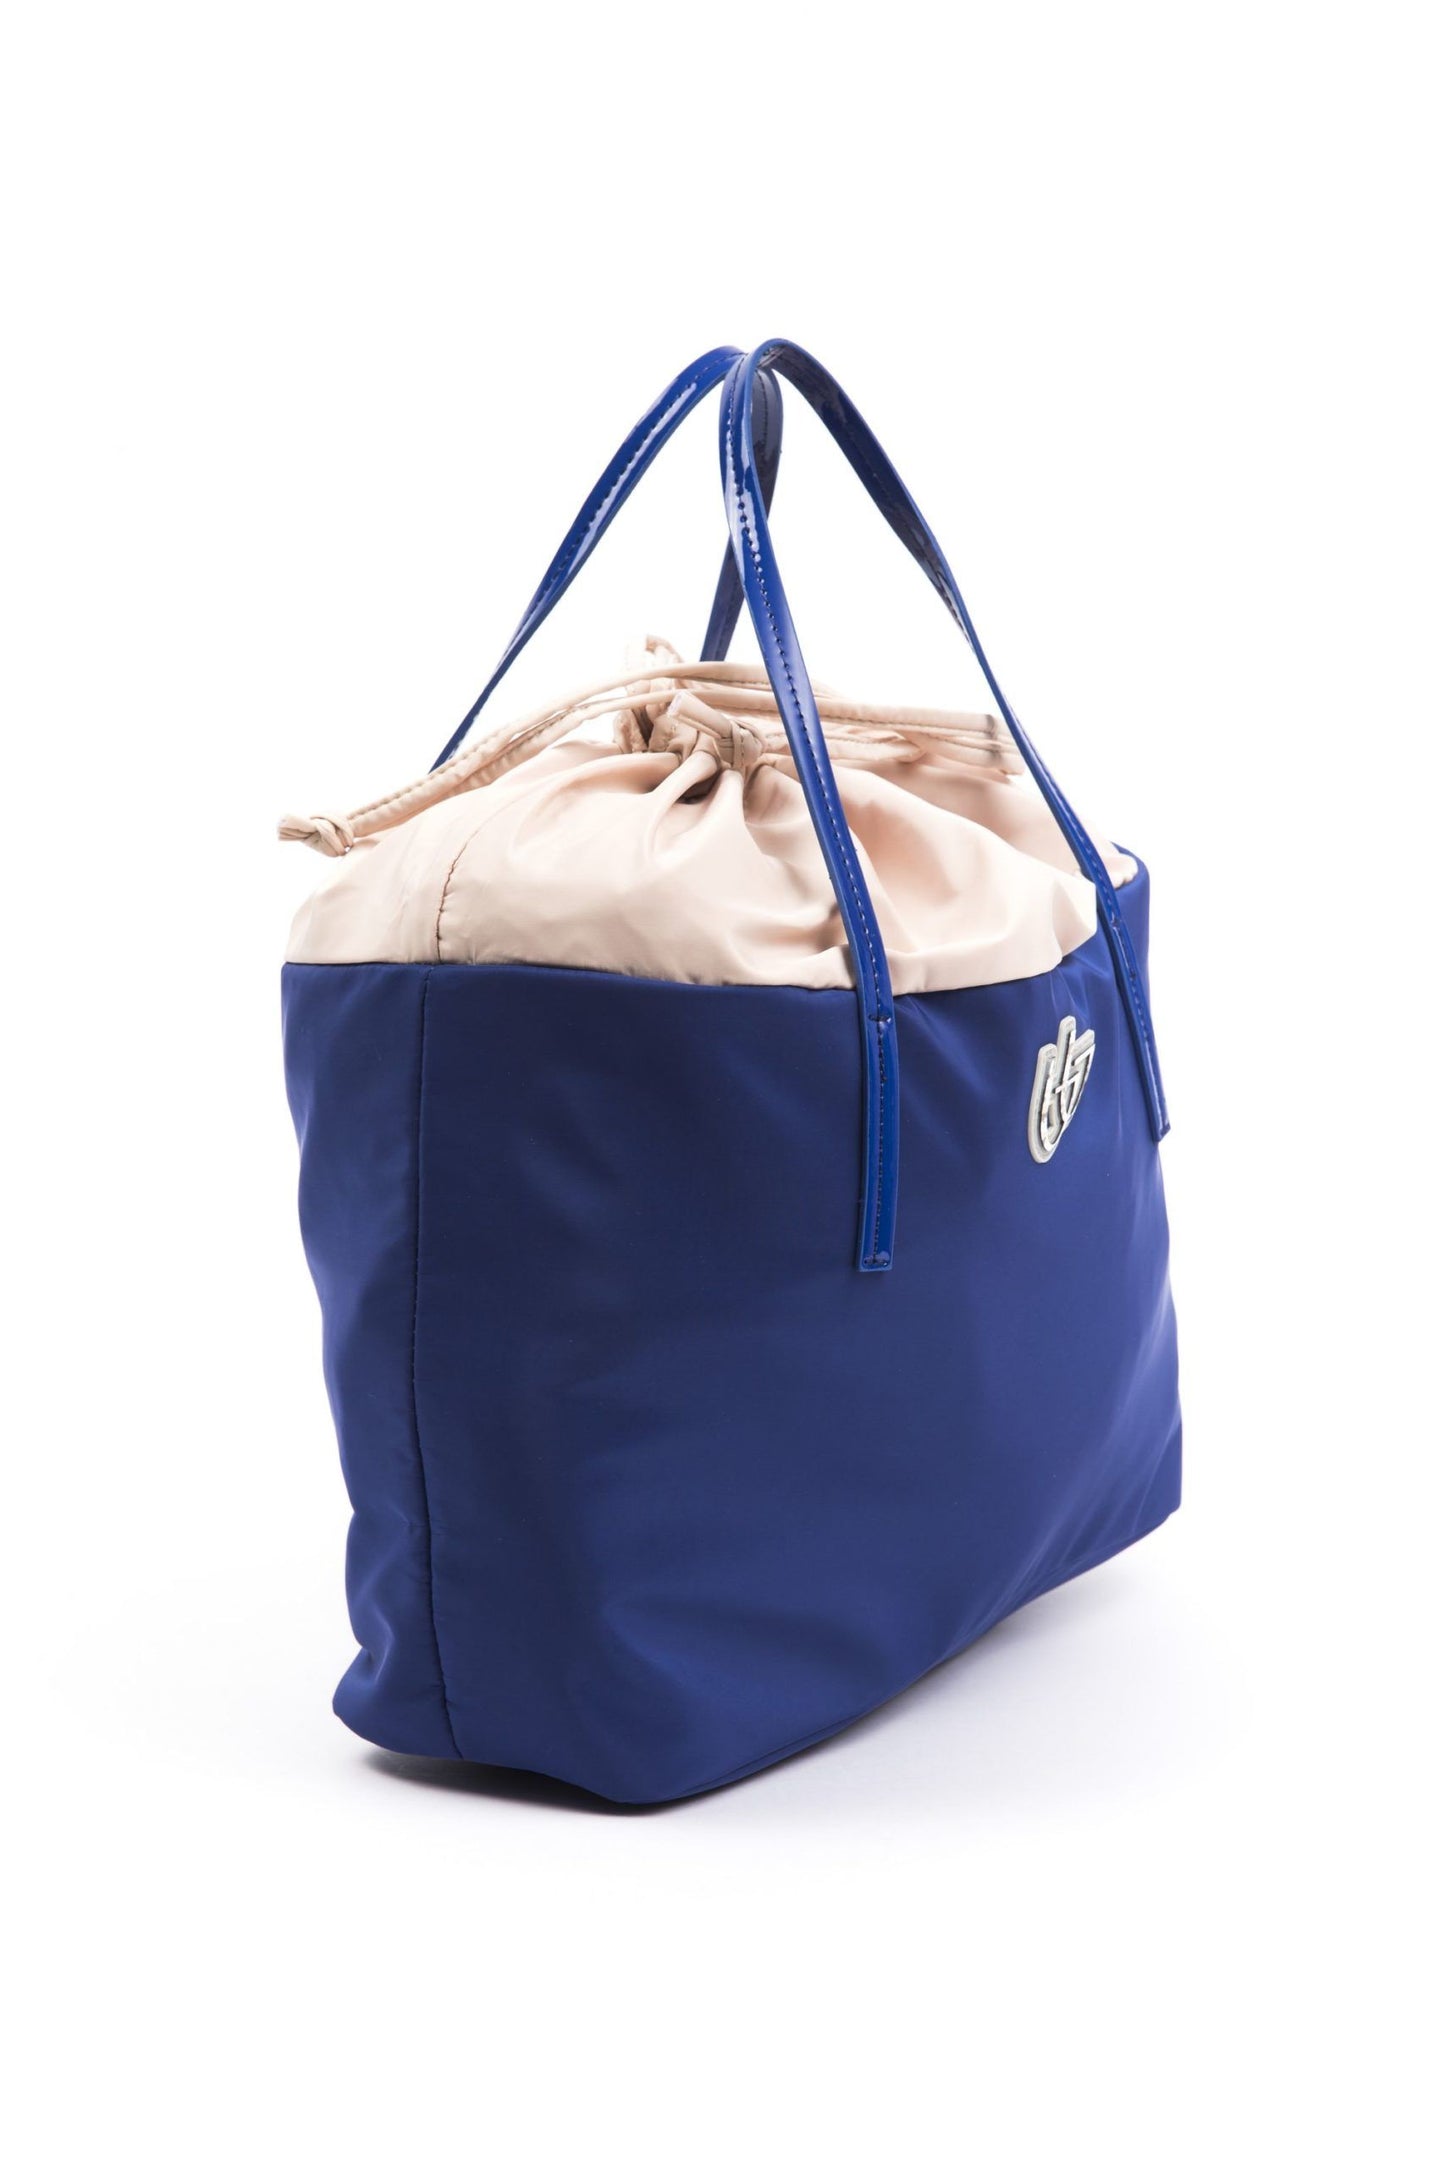 Chic Blue Fabric Shopper Tote with Patent Accents